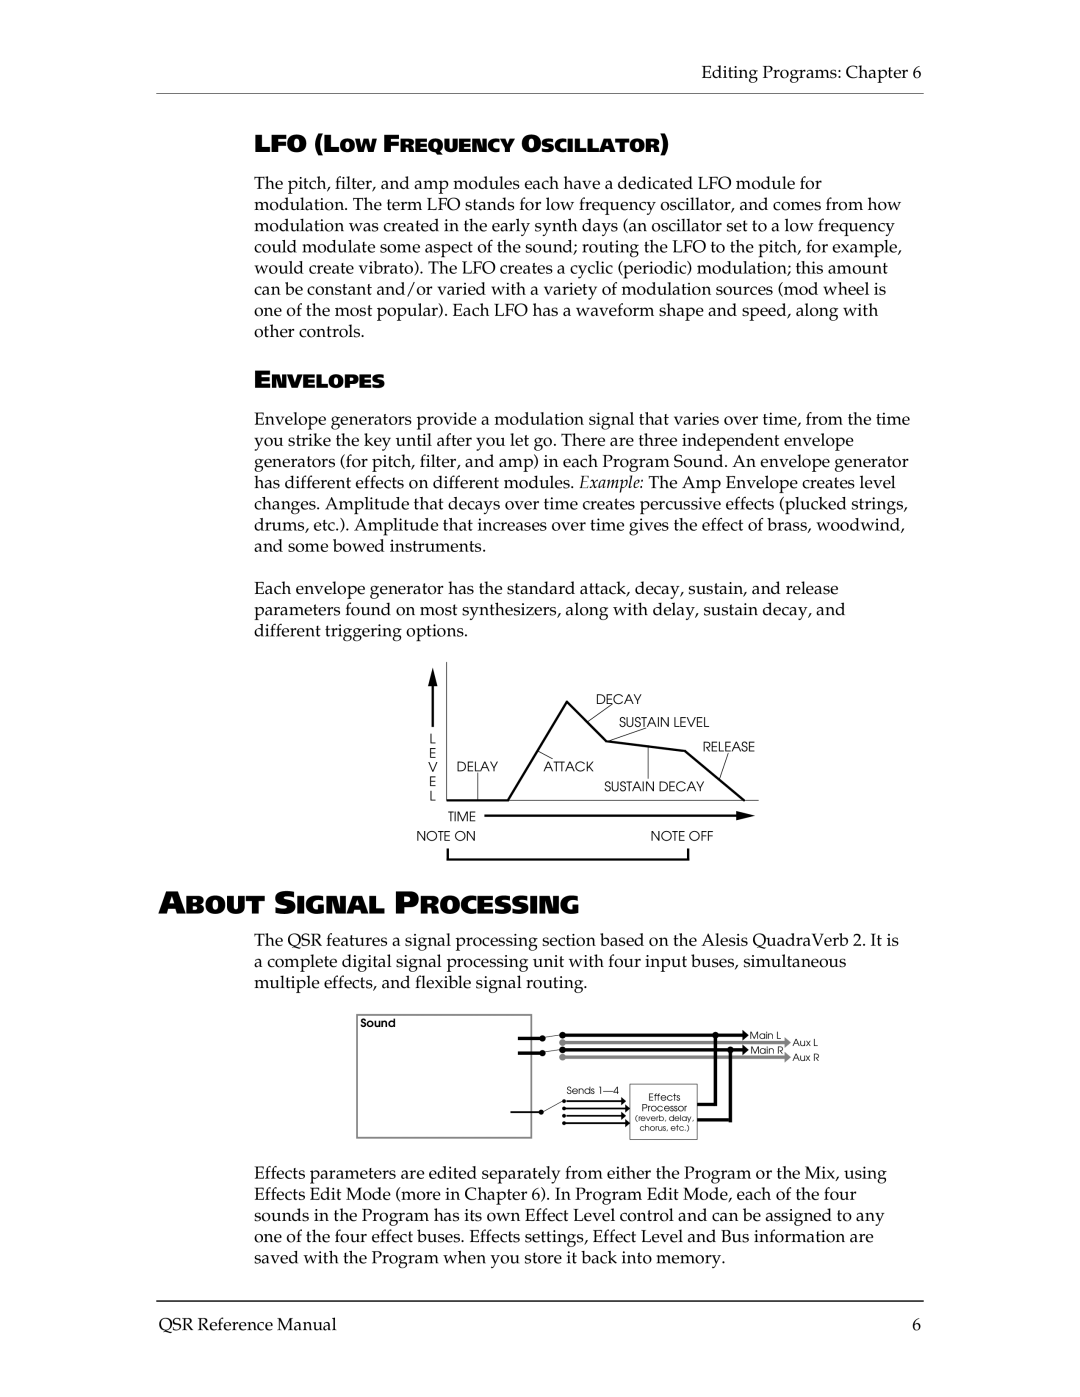 Alesis QSR 64 manual About Signal Processing, Lfo Low Frequency Oscillator, Envelopes 